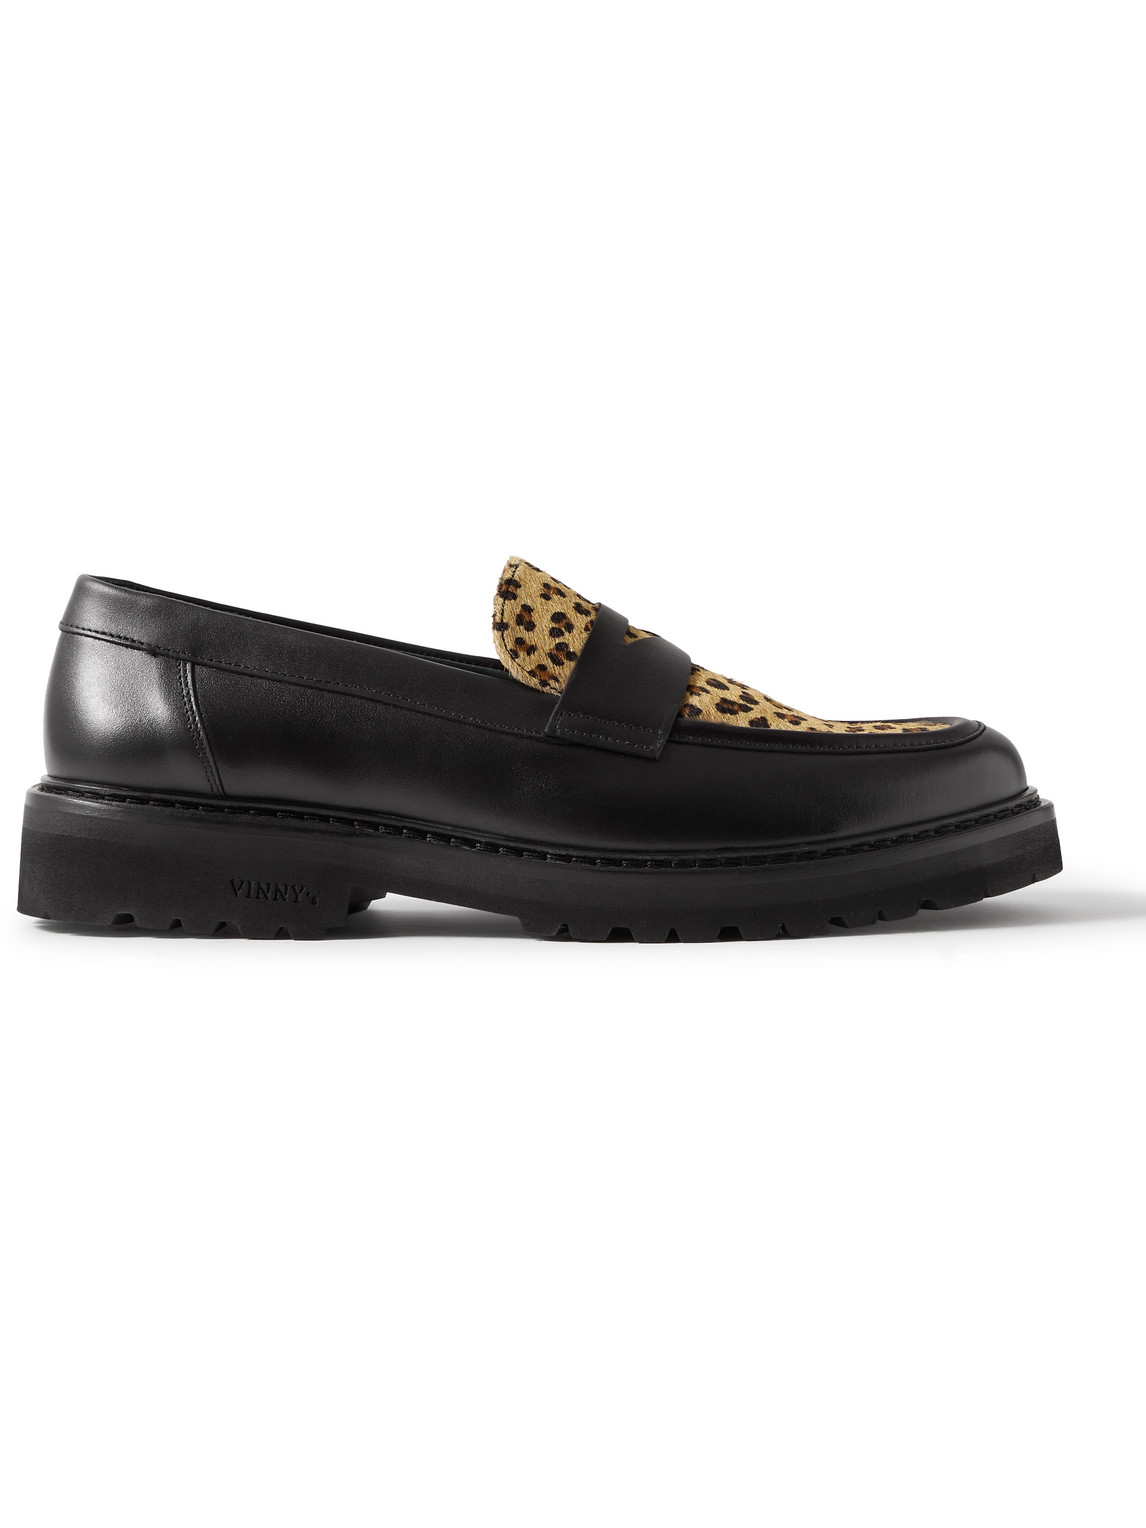 Vinny's Richee Leopard-print Calf Hair-trimmed Leather Penny Loafers In Black